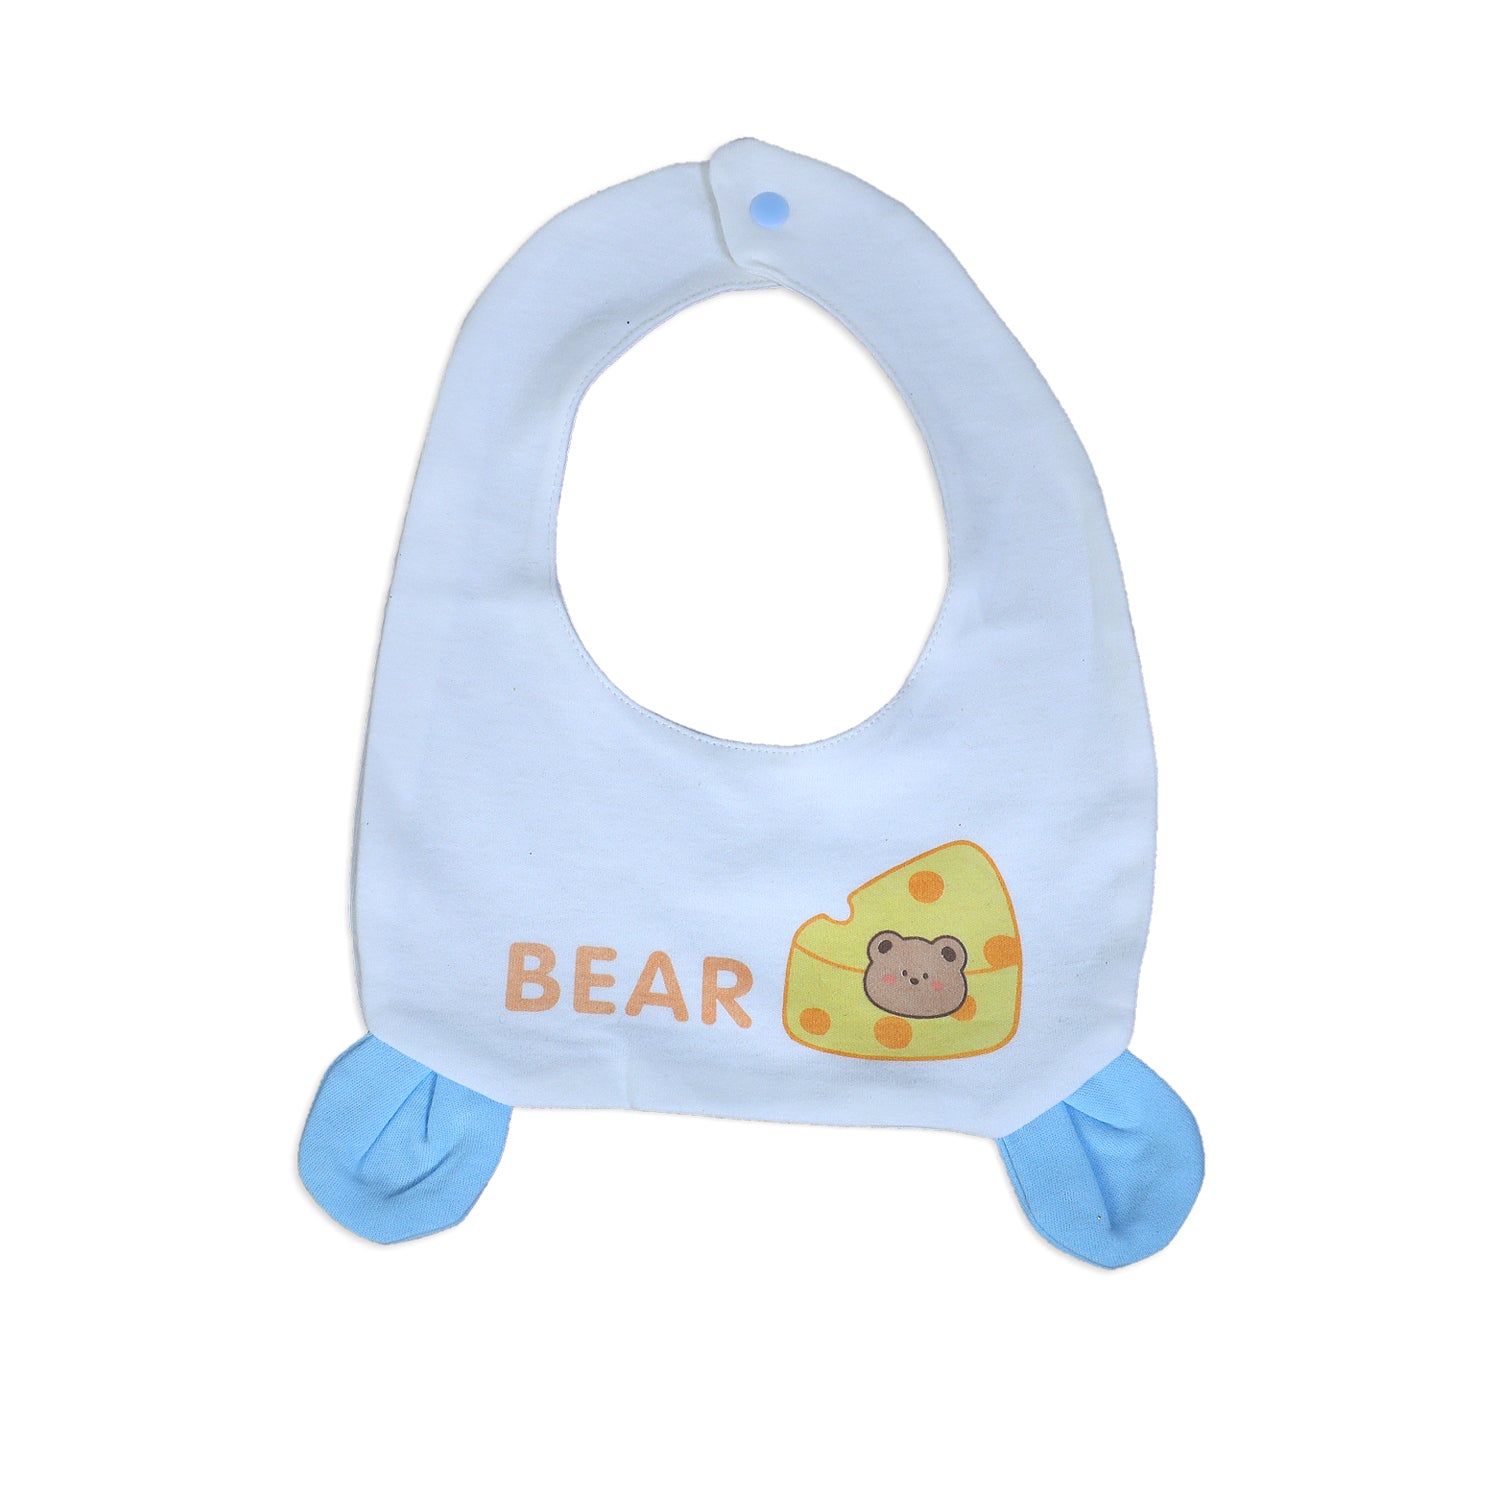 Cute Bear Full Sleeves One-Piece Body Suit With Snap Buttons Tie Knot And Matching Bib - Blue - Baby Moo